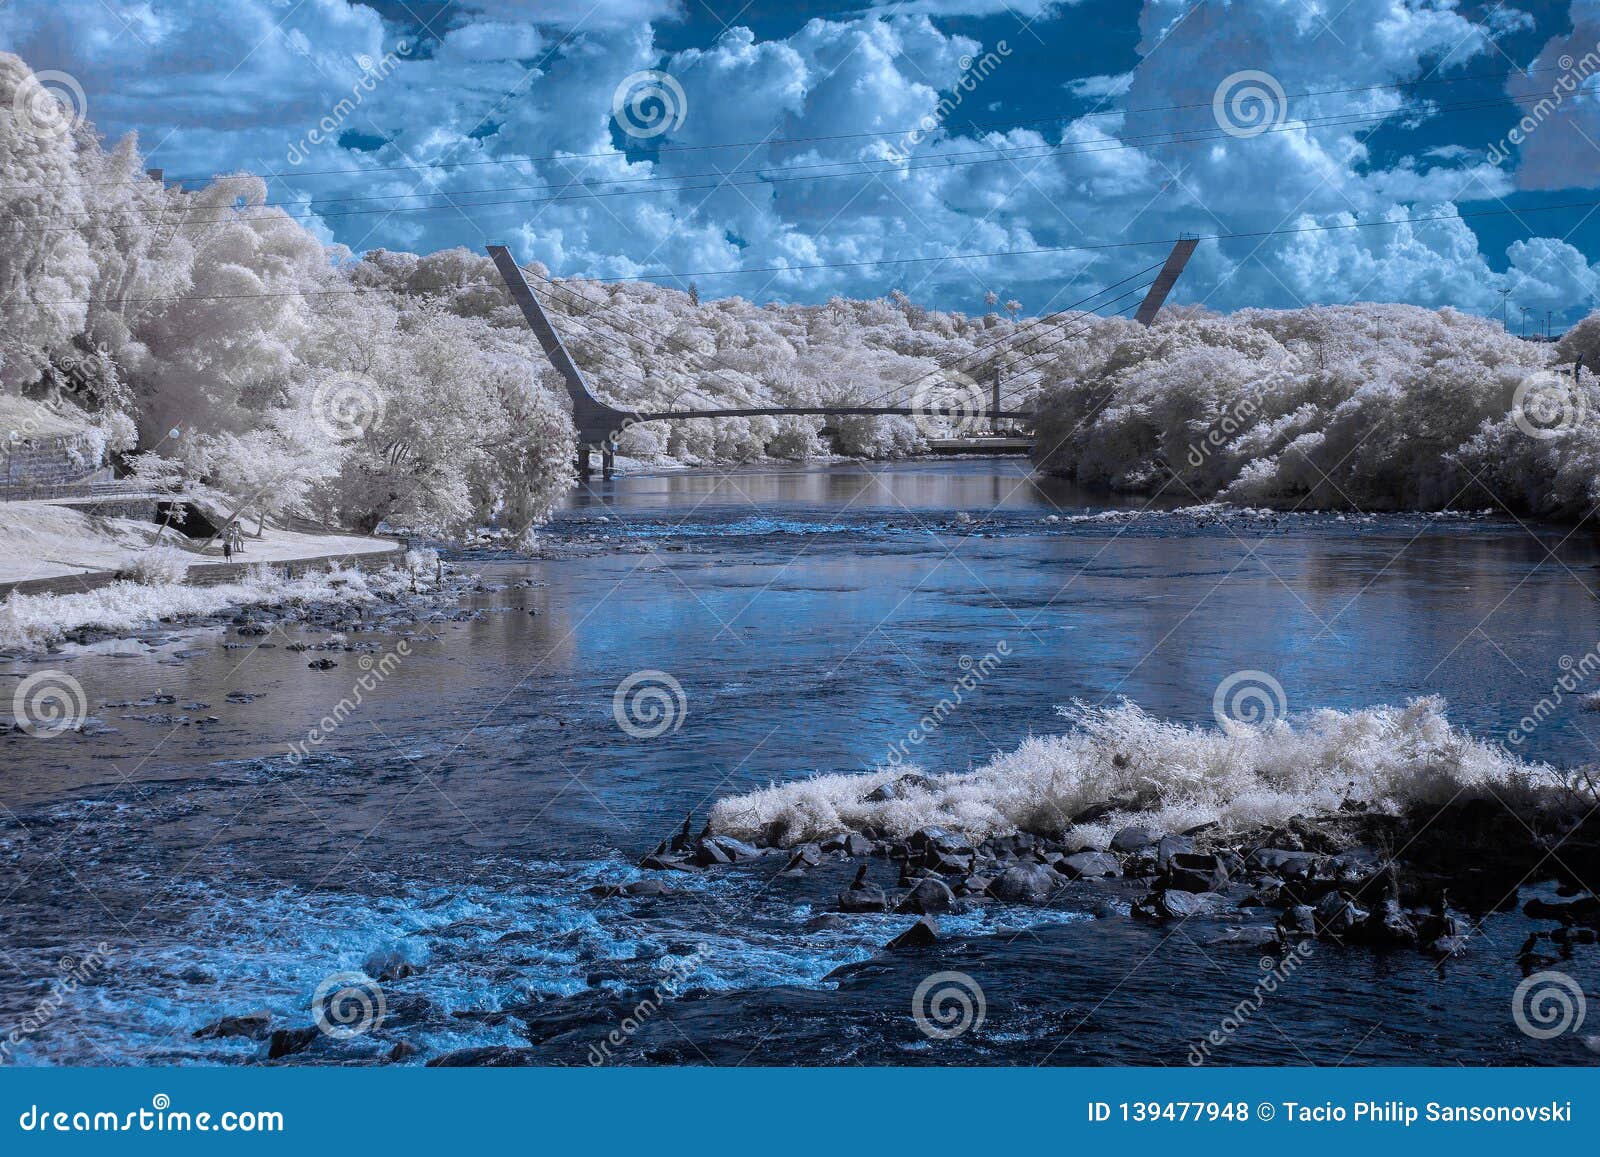 piracicaba river and city in infrared - 720nm